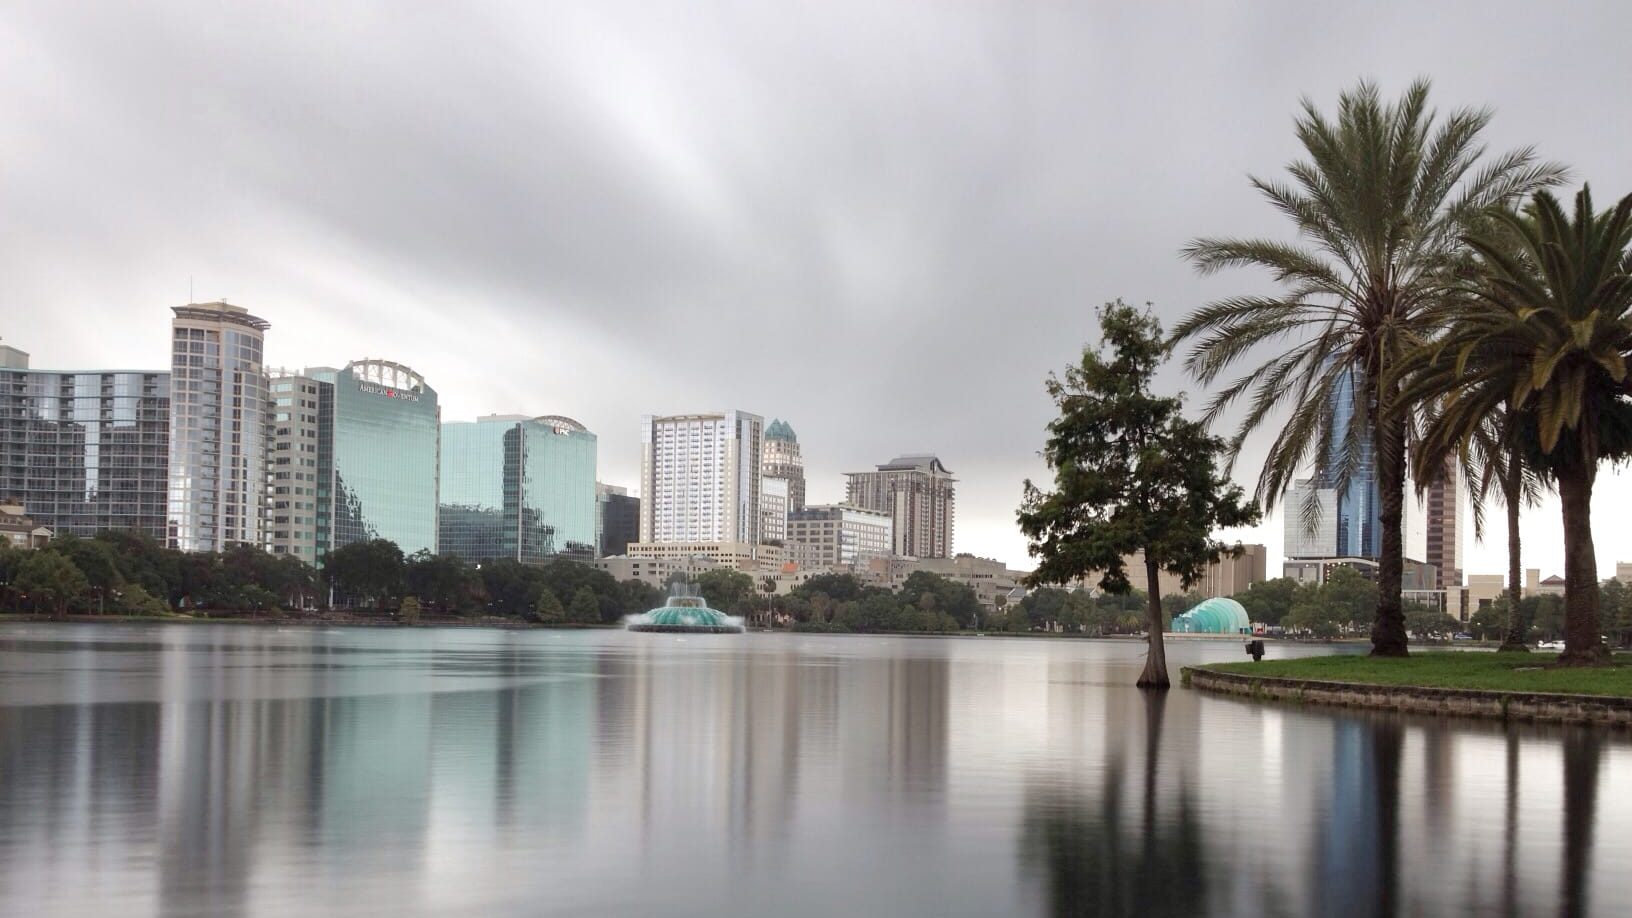 orlando florida skyline view from lake eola, with reflections on still waters